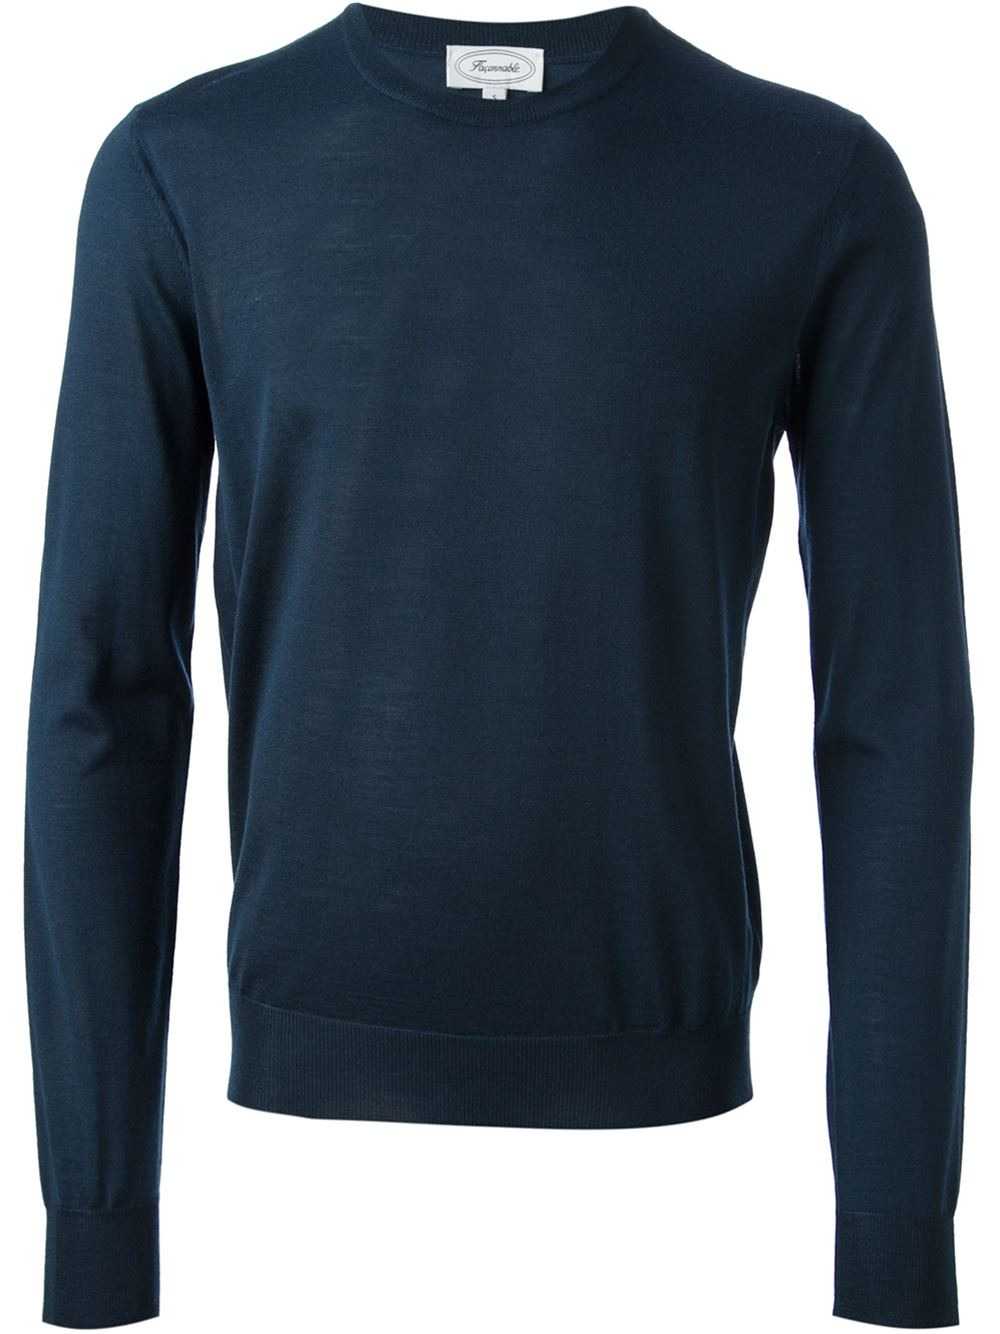 Lyst - Façonnable Knit Sweater in Blue for Men